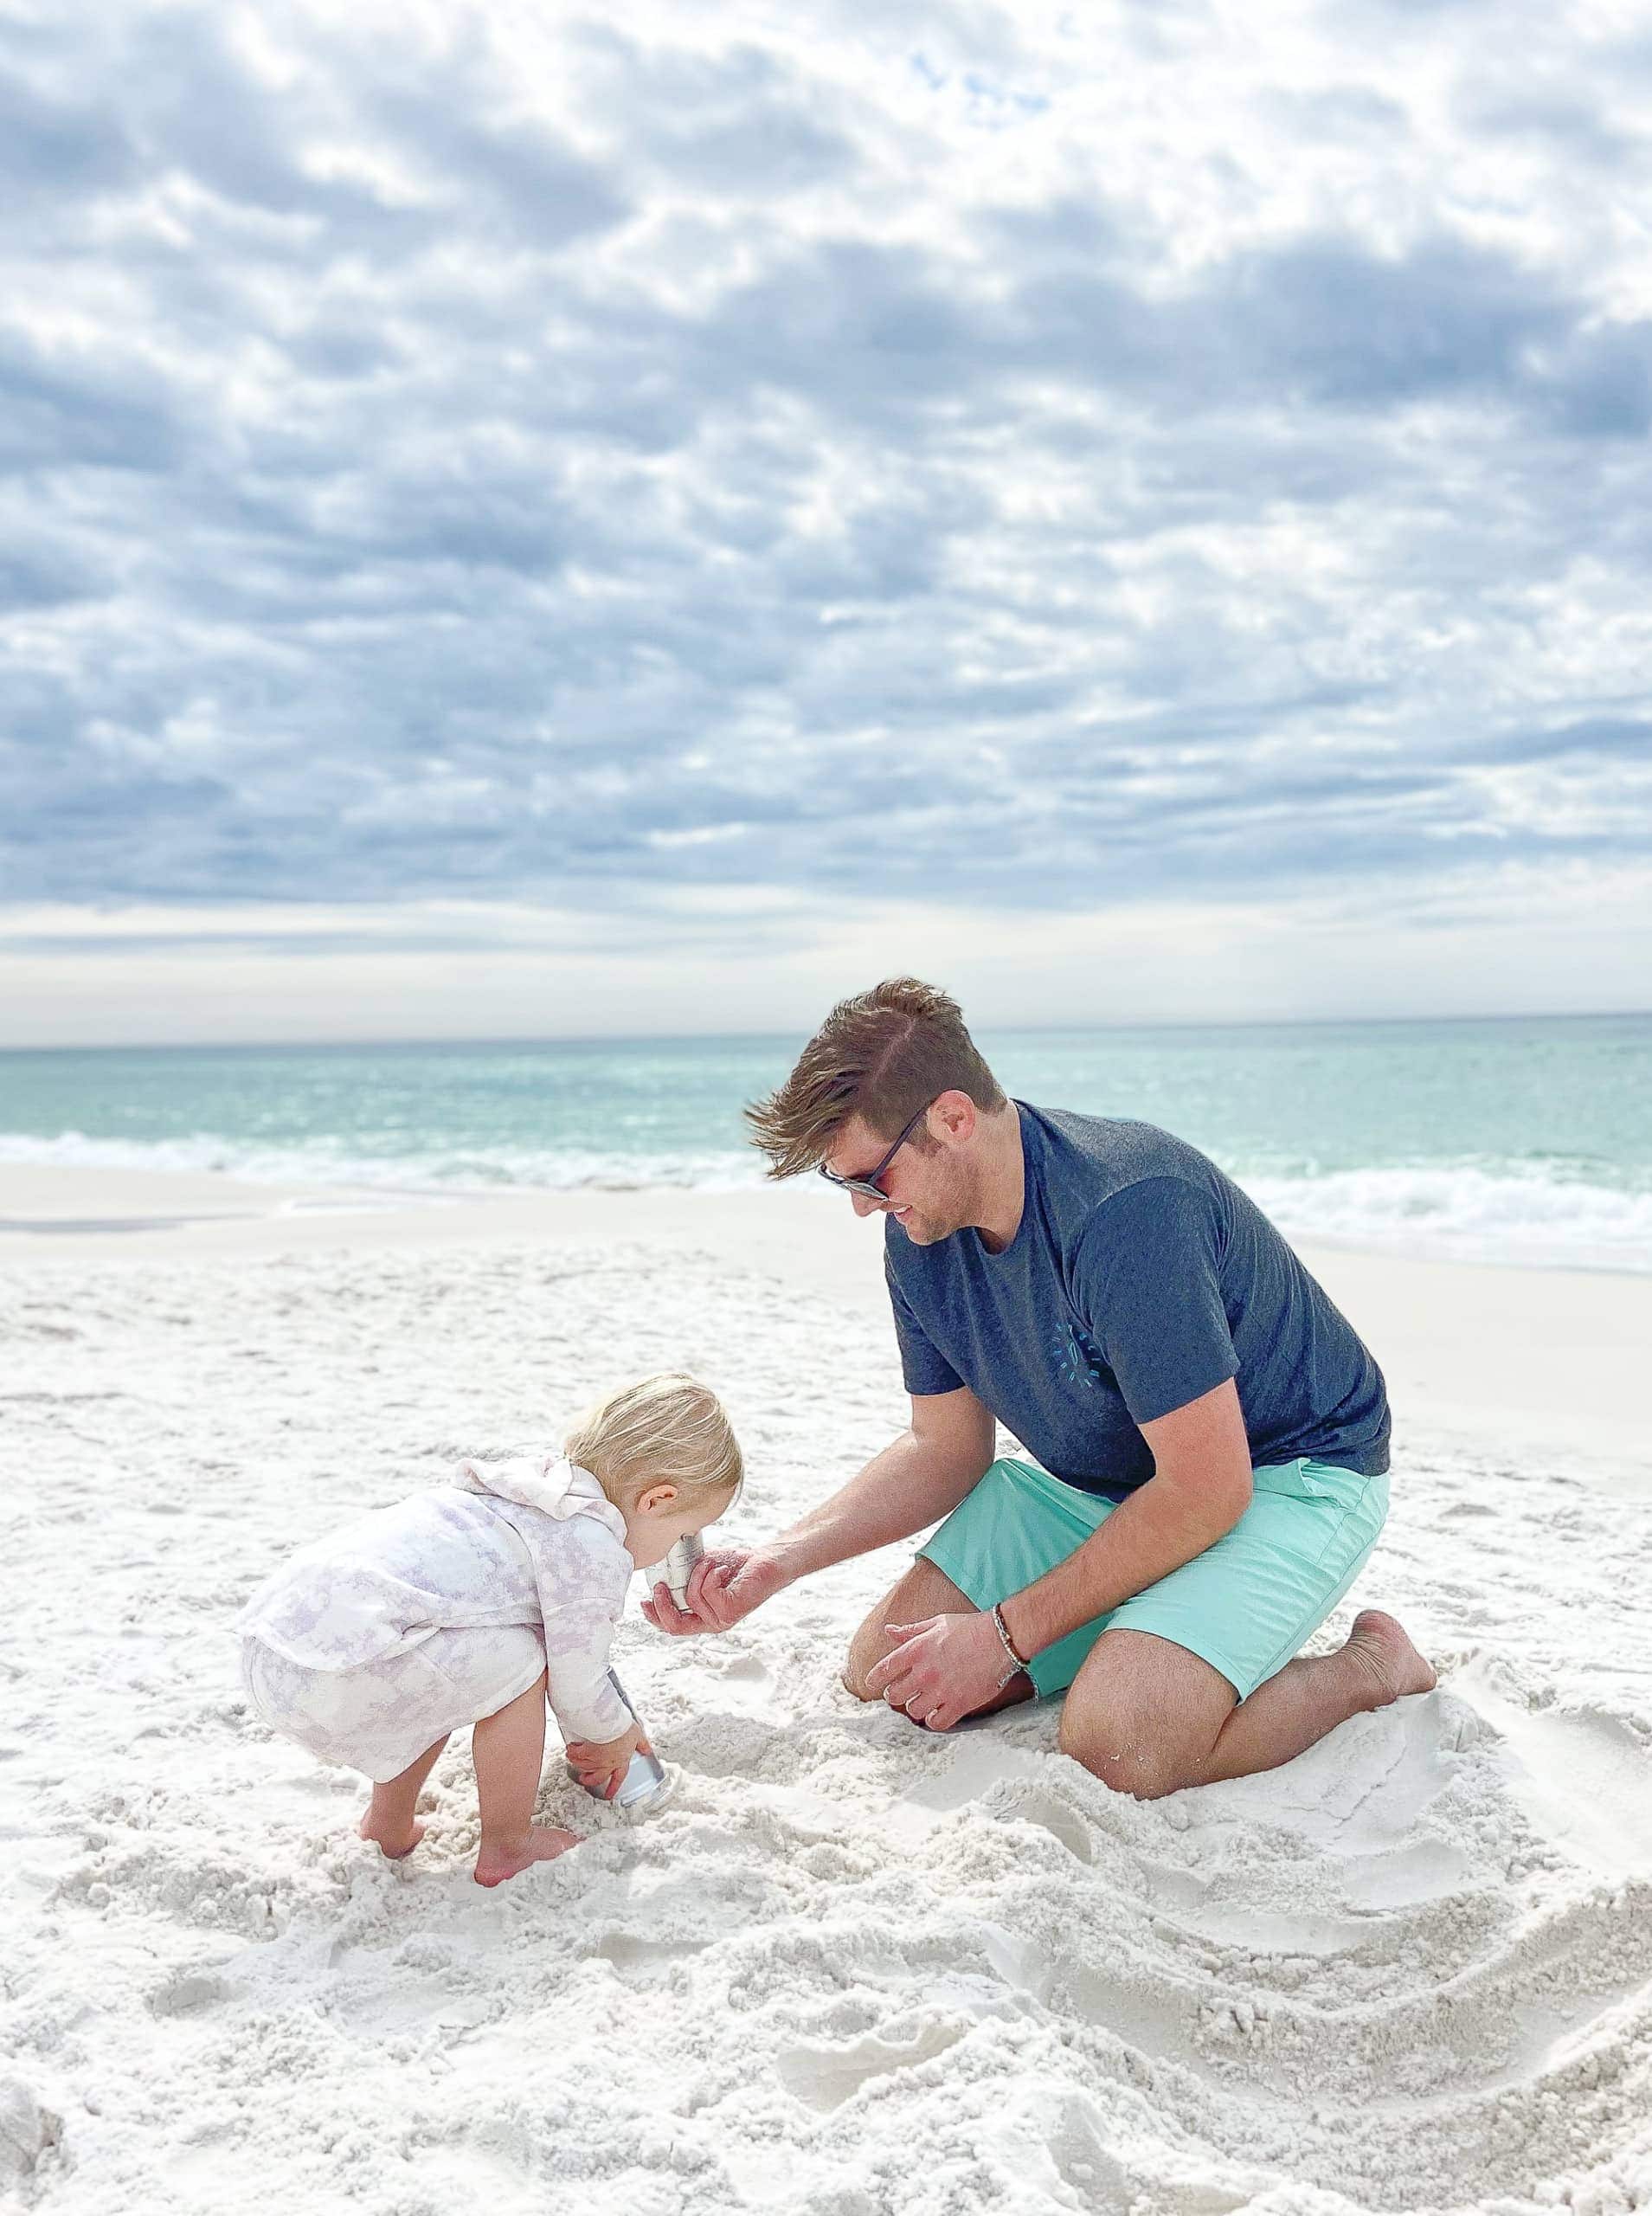 Spending time in the sun and sand in Seaside, Florida